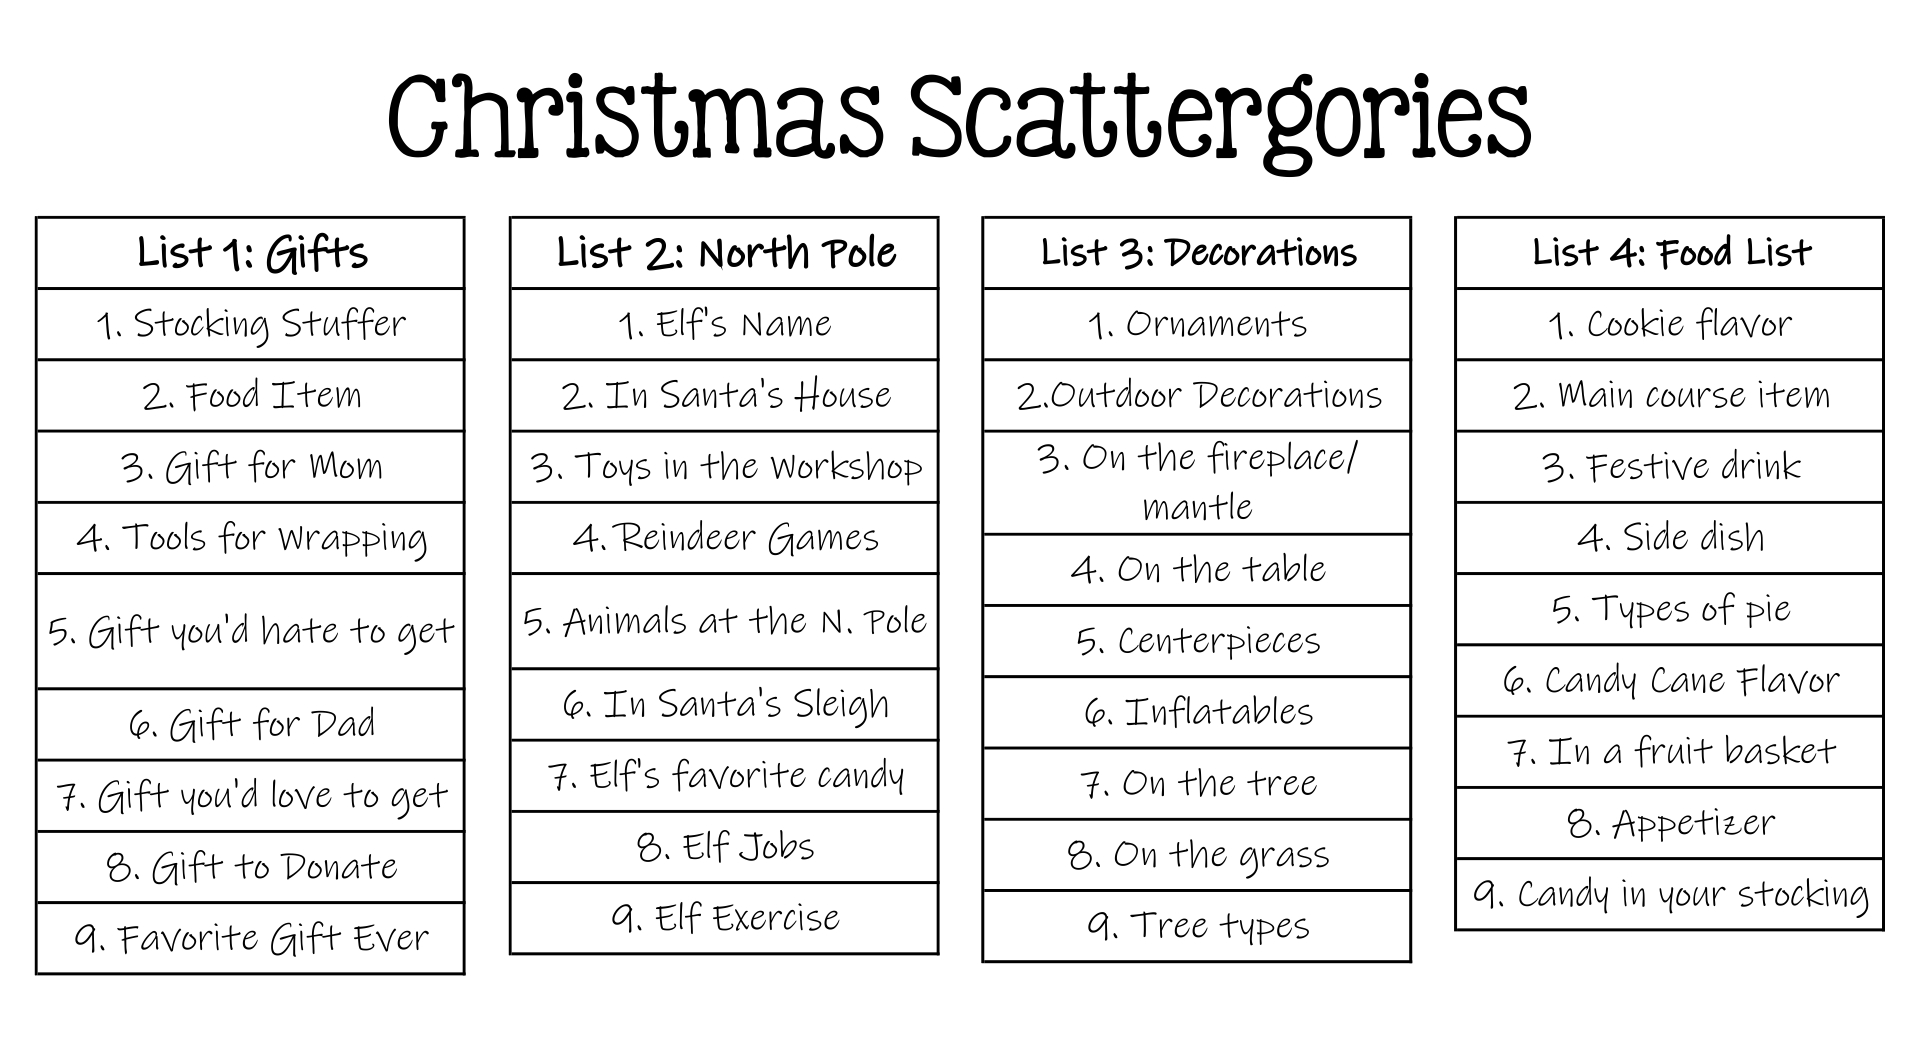 scattergories questions lists downloadable free